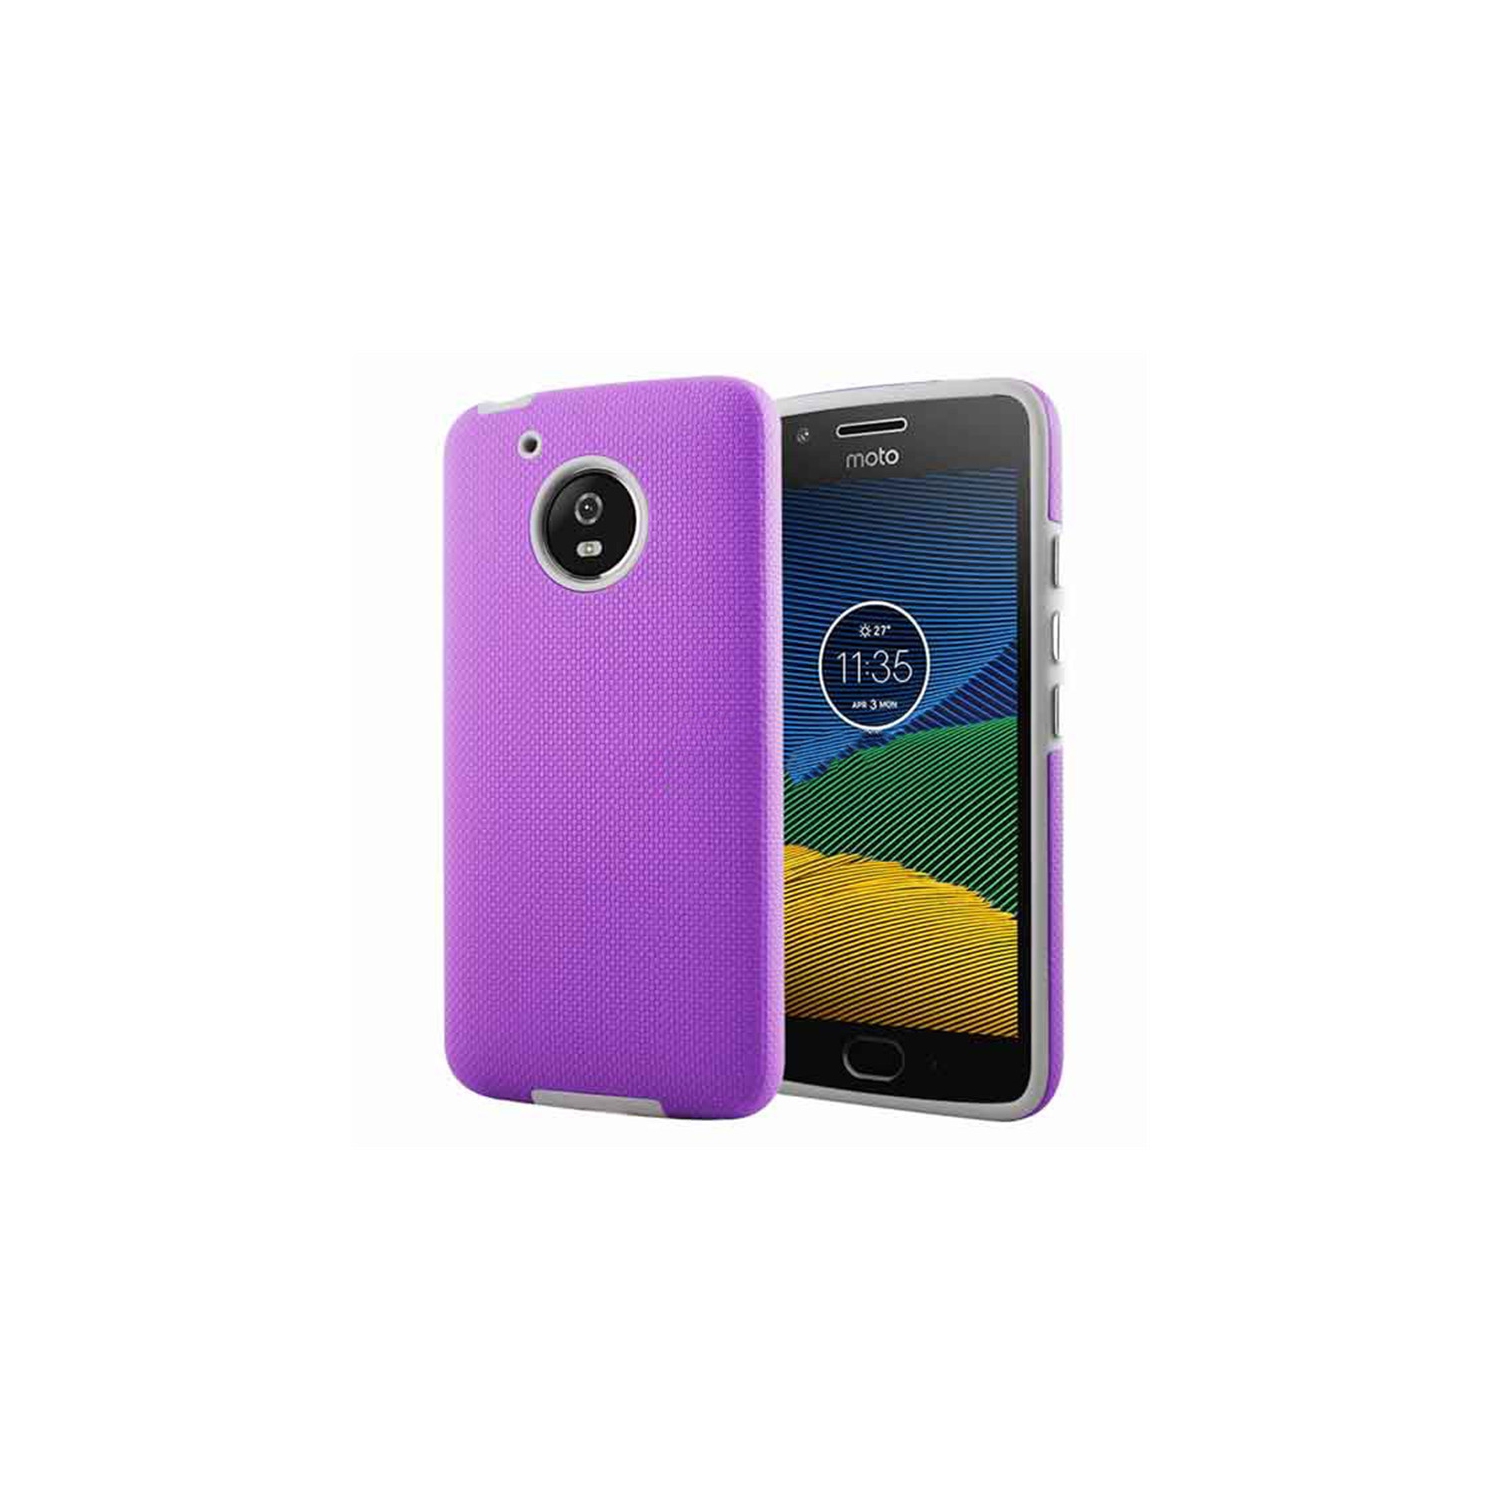 【CSmart】 Slim Fitted Hybrid Hard PC Shell Shockproof Scratch Resistant Case Cover for Motorola Moto G6, Purple